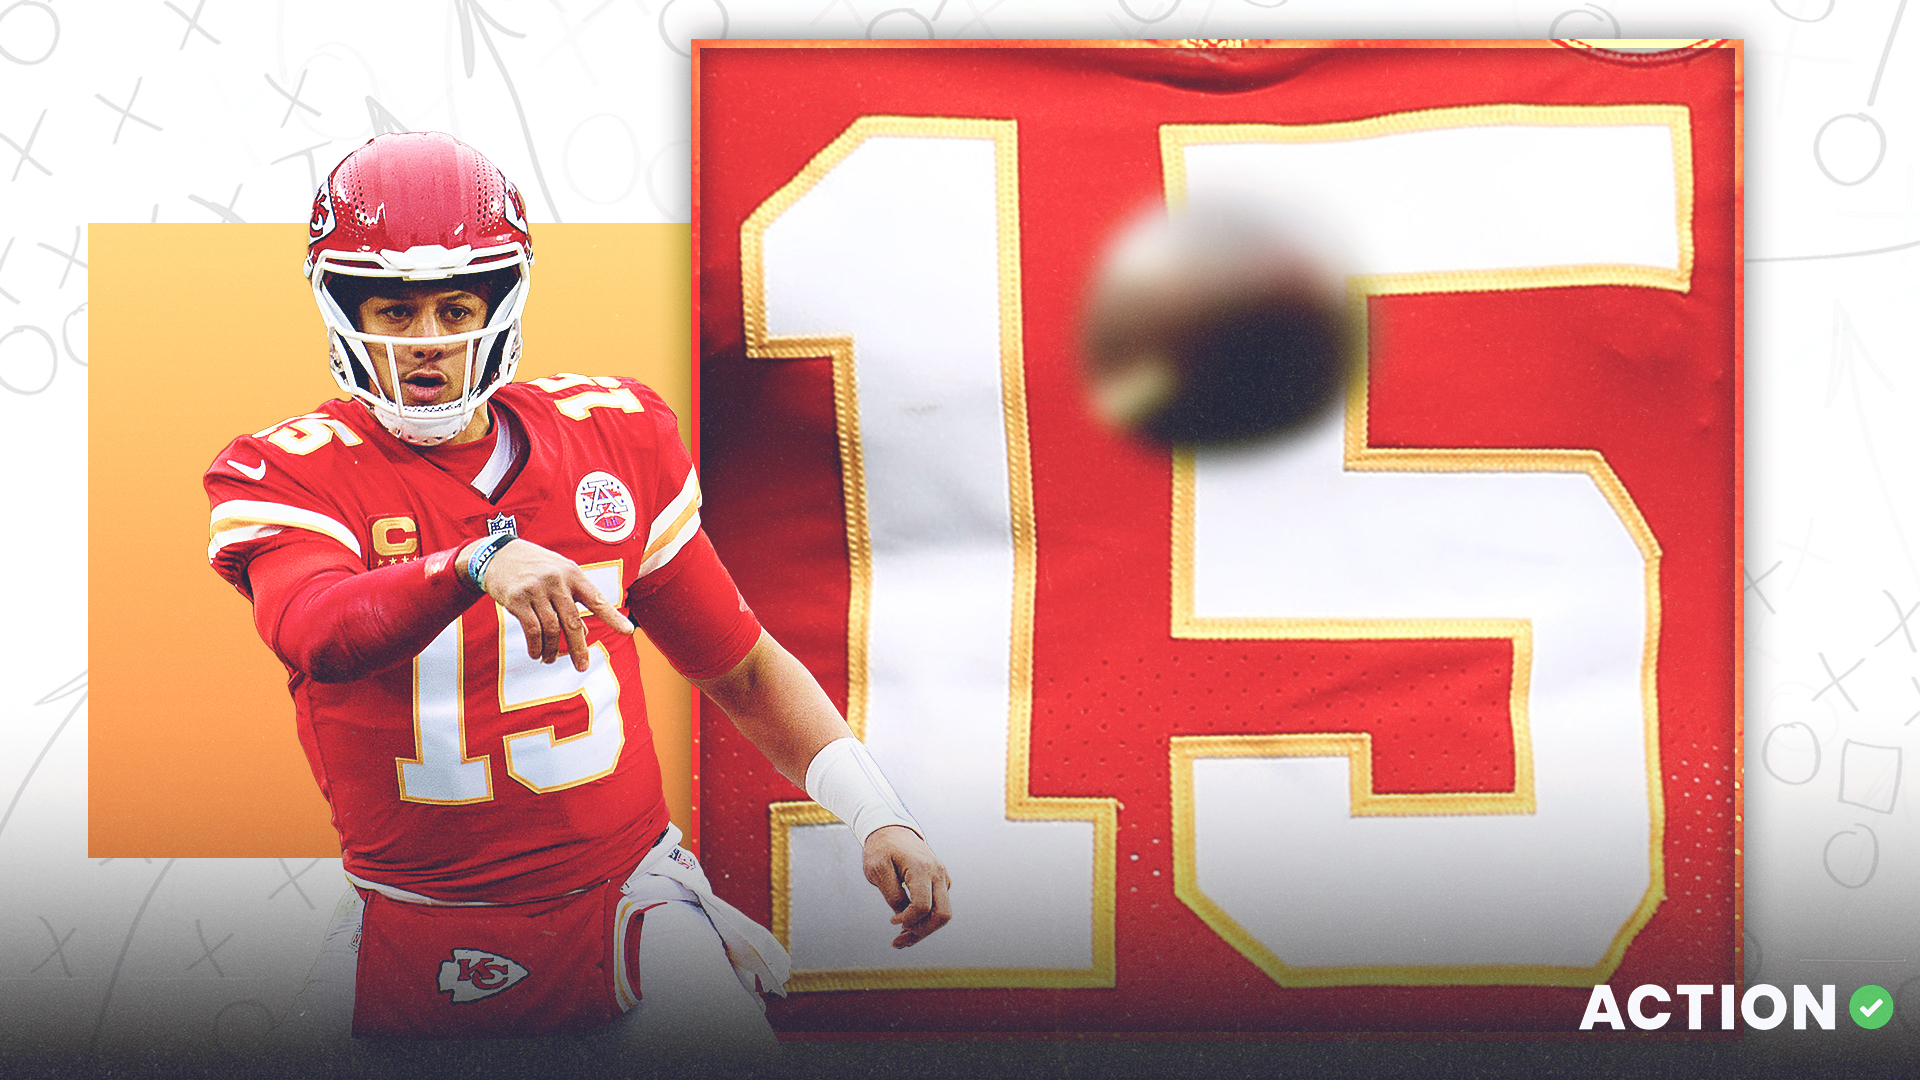 Patrick Mahomes Betting Career Manifesto: 15 Facts, Trends & Notes Entering Super Bowl 57 article feature image